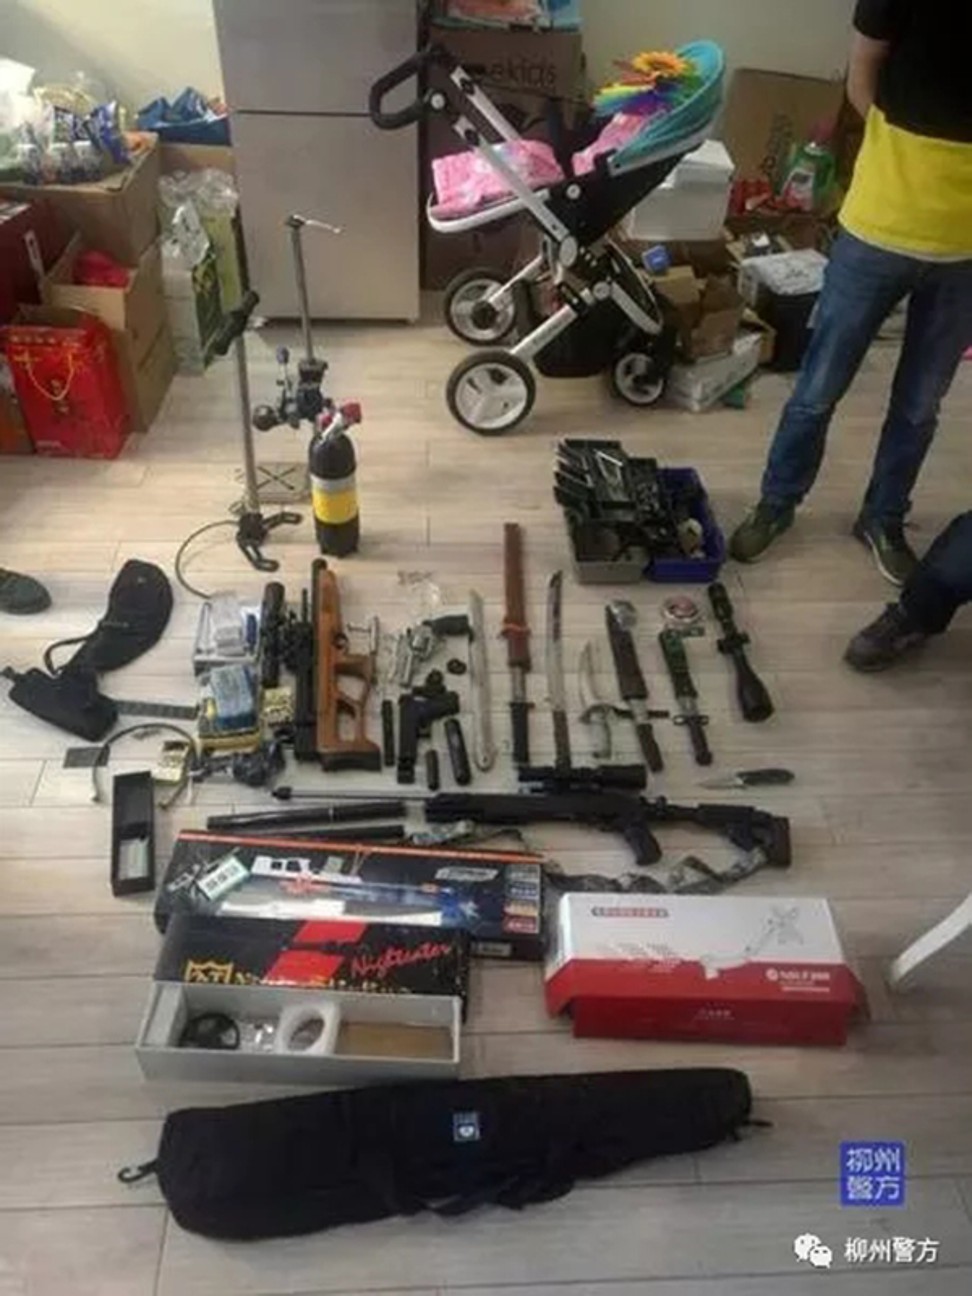 The huge haul included military-grade weapons as well as air rifles and even hand grenade. Photo: Thepaper.cn